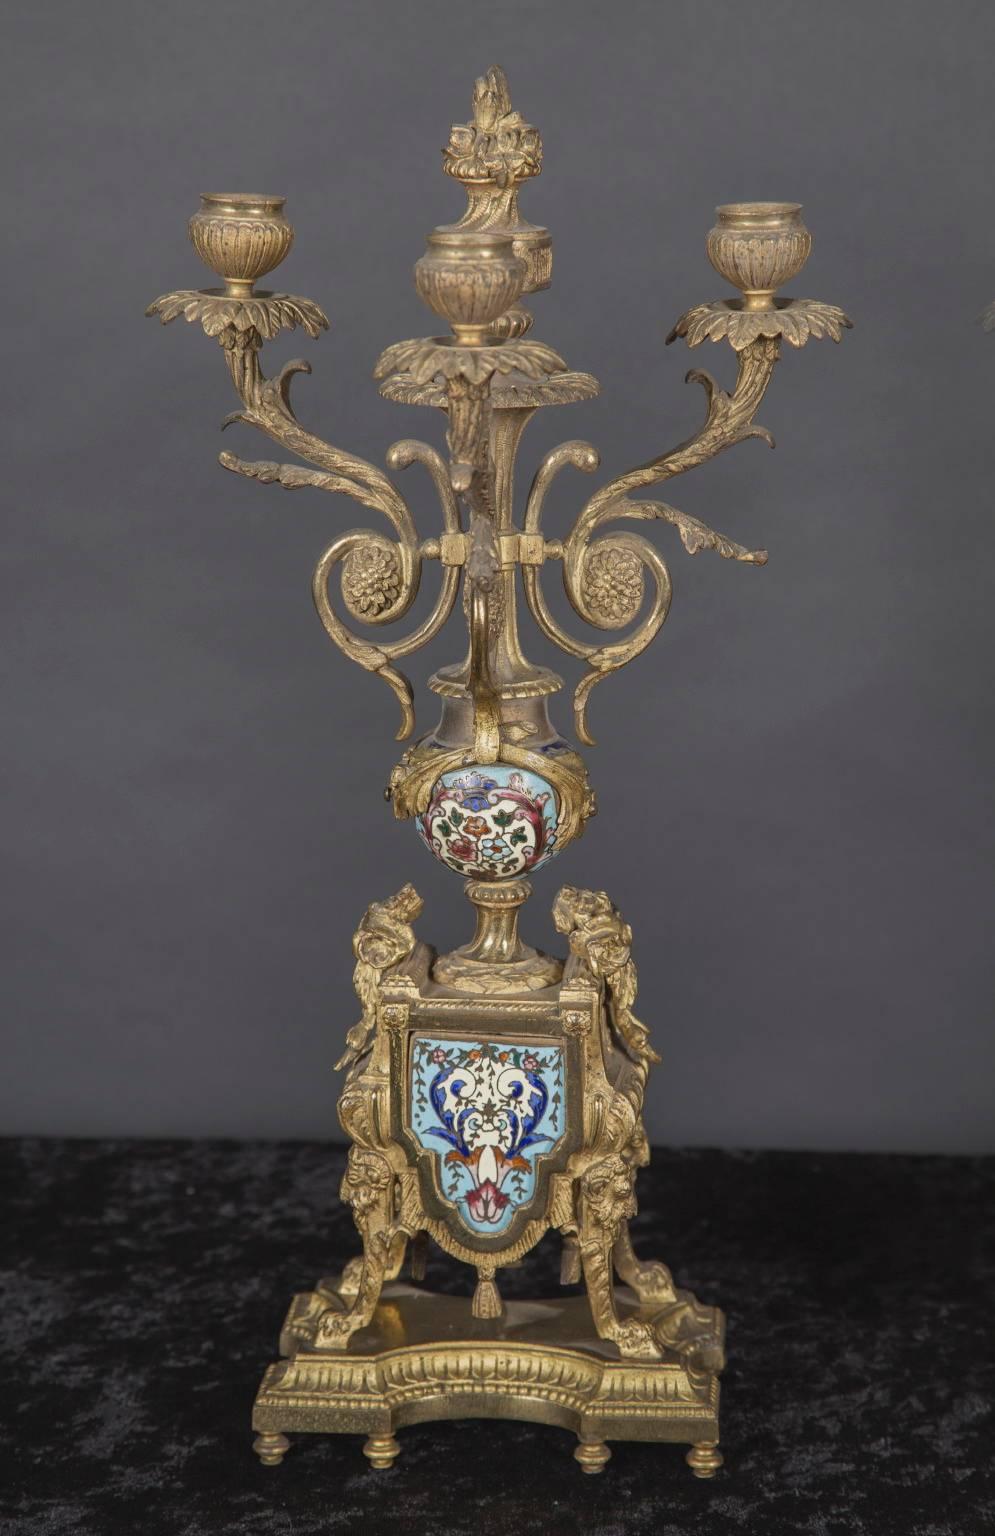 This unusual pair of 19th century three branch candelabra is made of bronze and features Champleve insets. The French antique pair is flat-backed, made to be used against the wall, as on a mantel, and has bronze candle cups and bobeches of leaves.